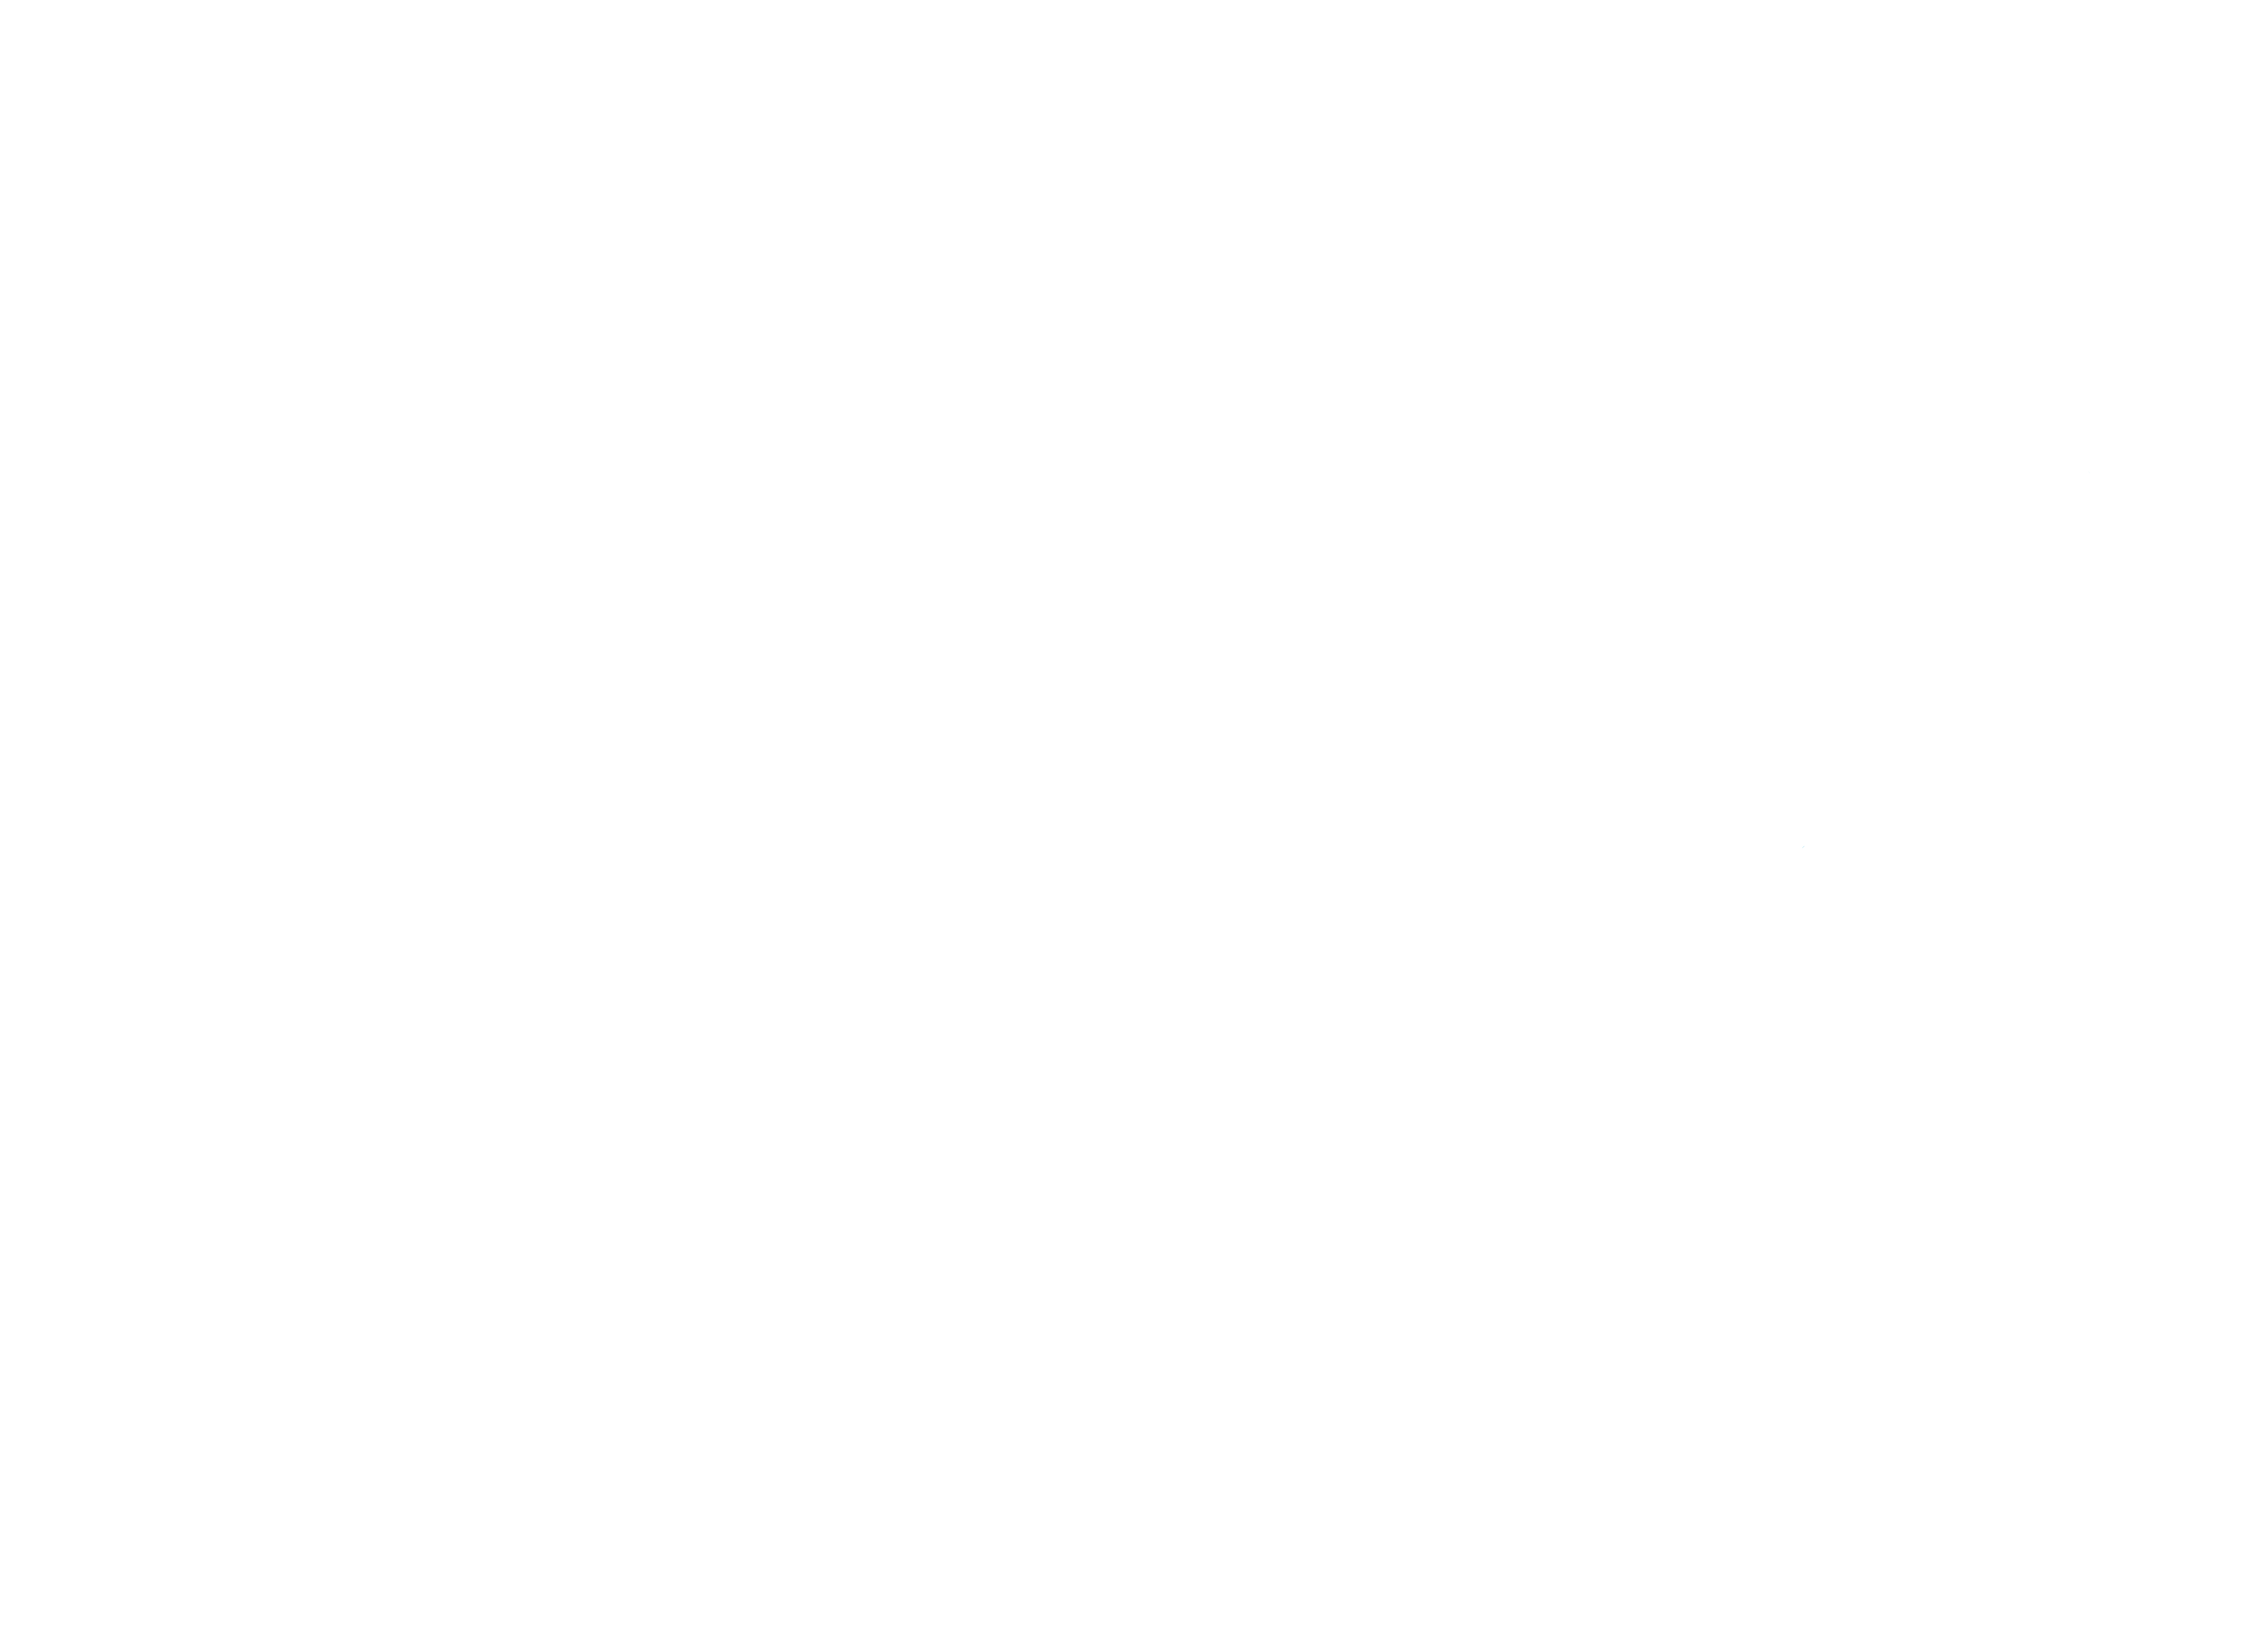 Surf Payroll Help Centre home page